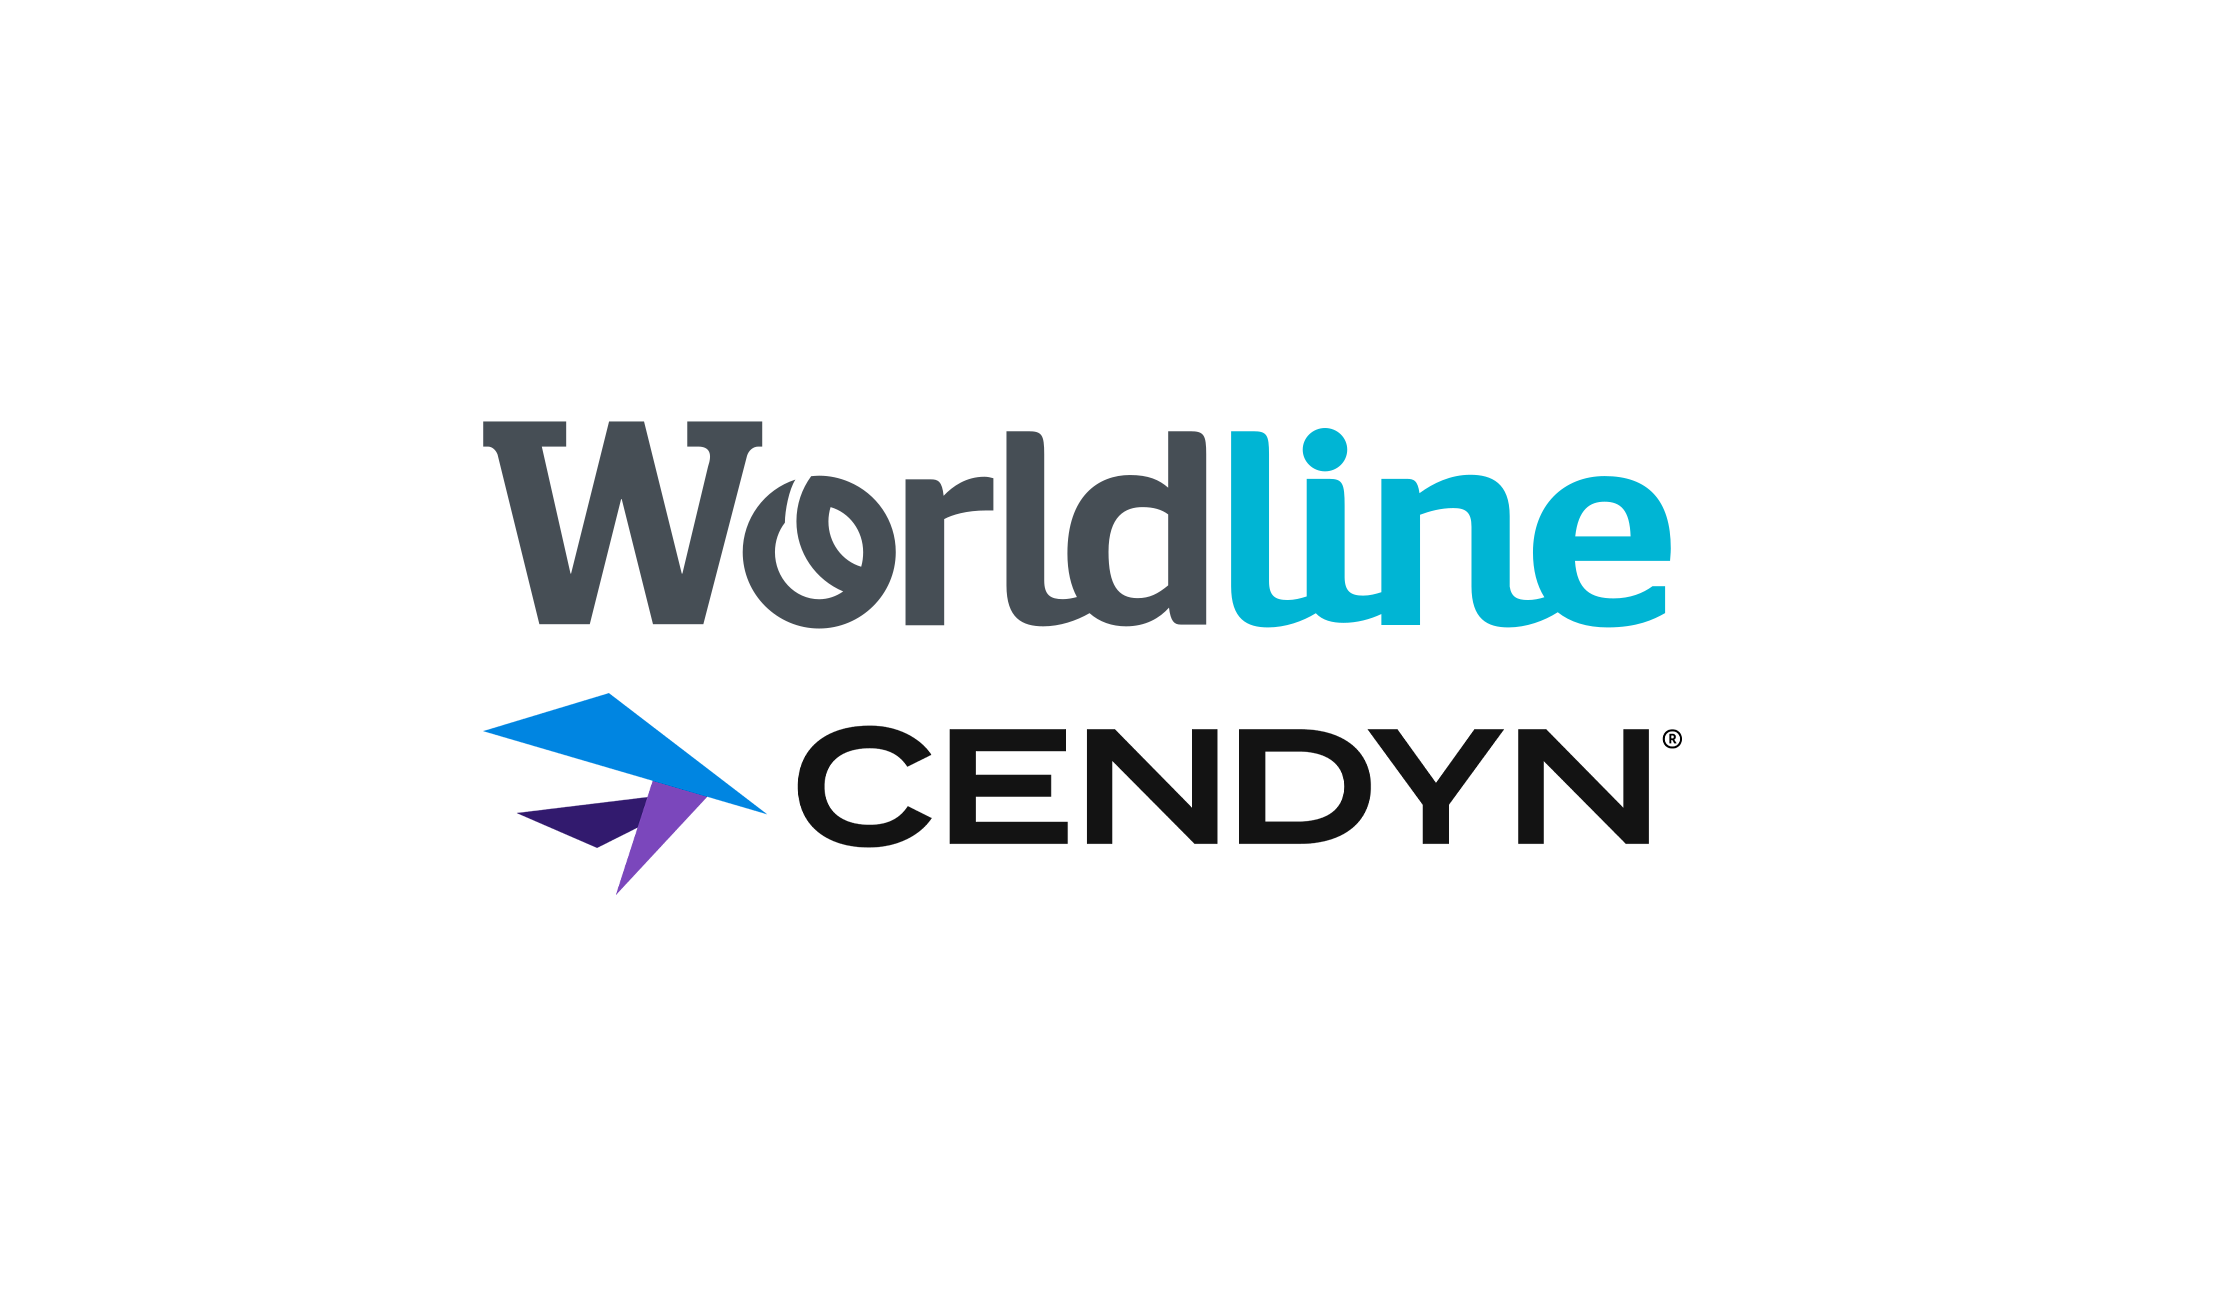 Worldline Partners with Cendyn to Enhance Online Payment Capabilities in the Hospitality Industry